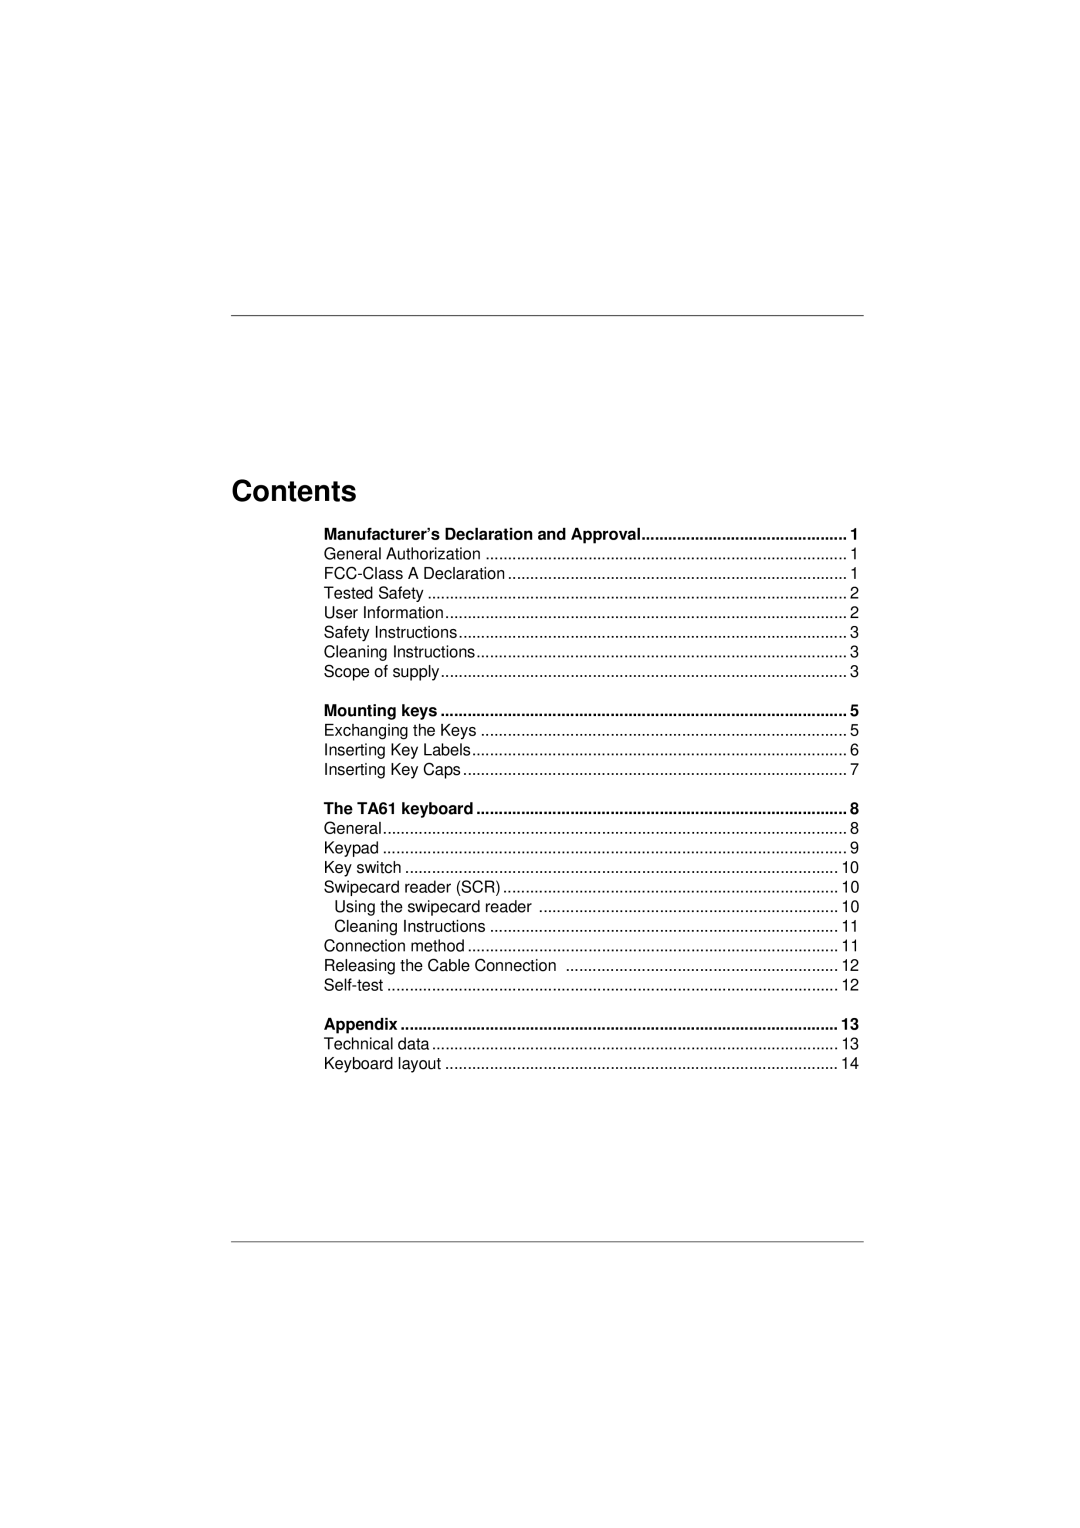 Microsoft TA61 manual Contents, Manufacturer’s Declaration and Approval, Key switch, Connection method, Self-test, Appendix 